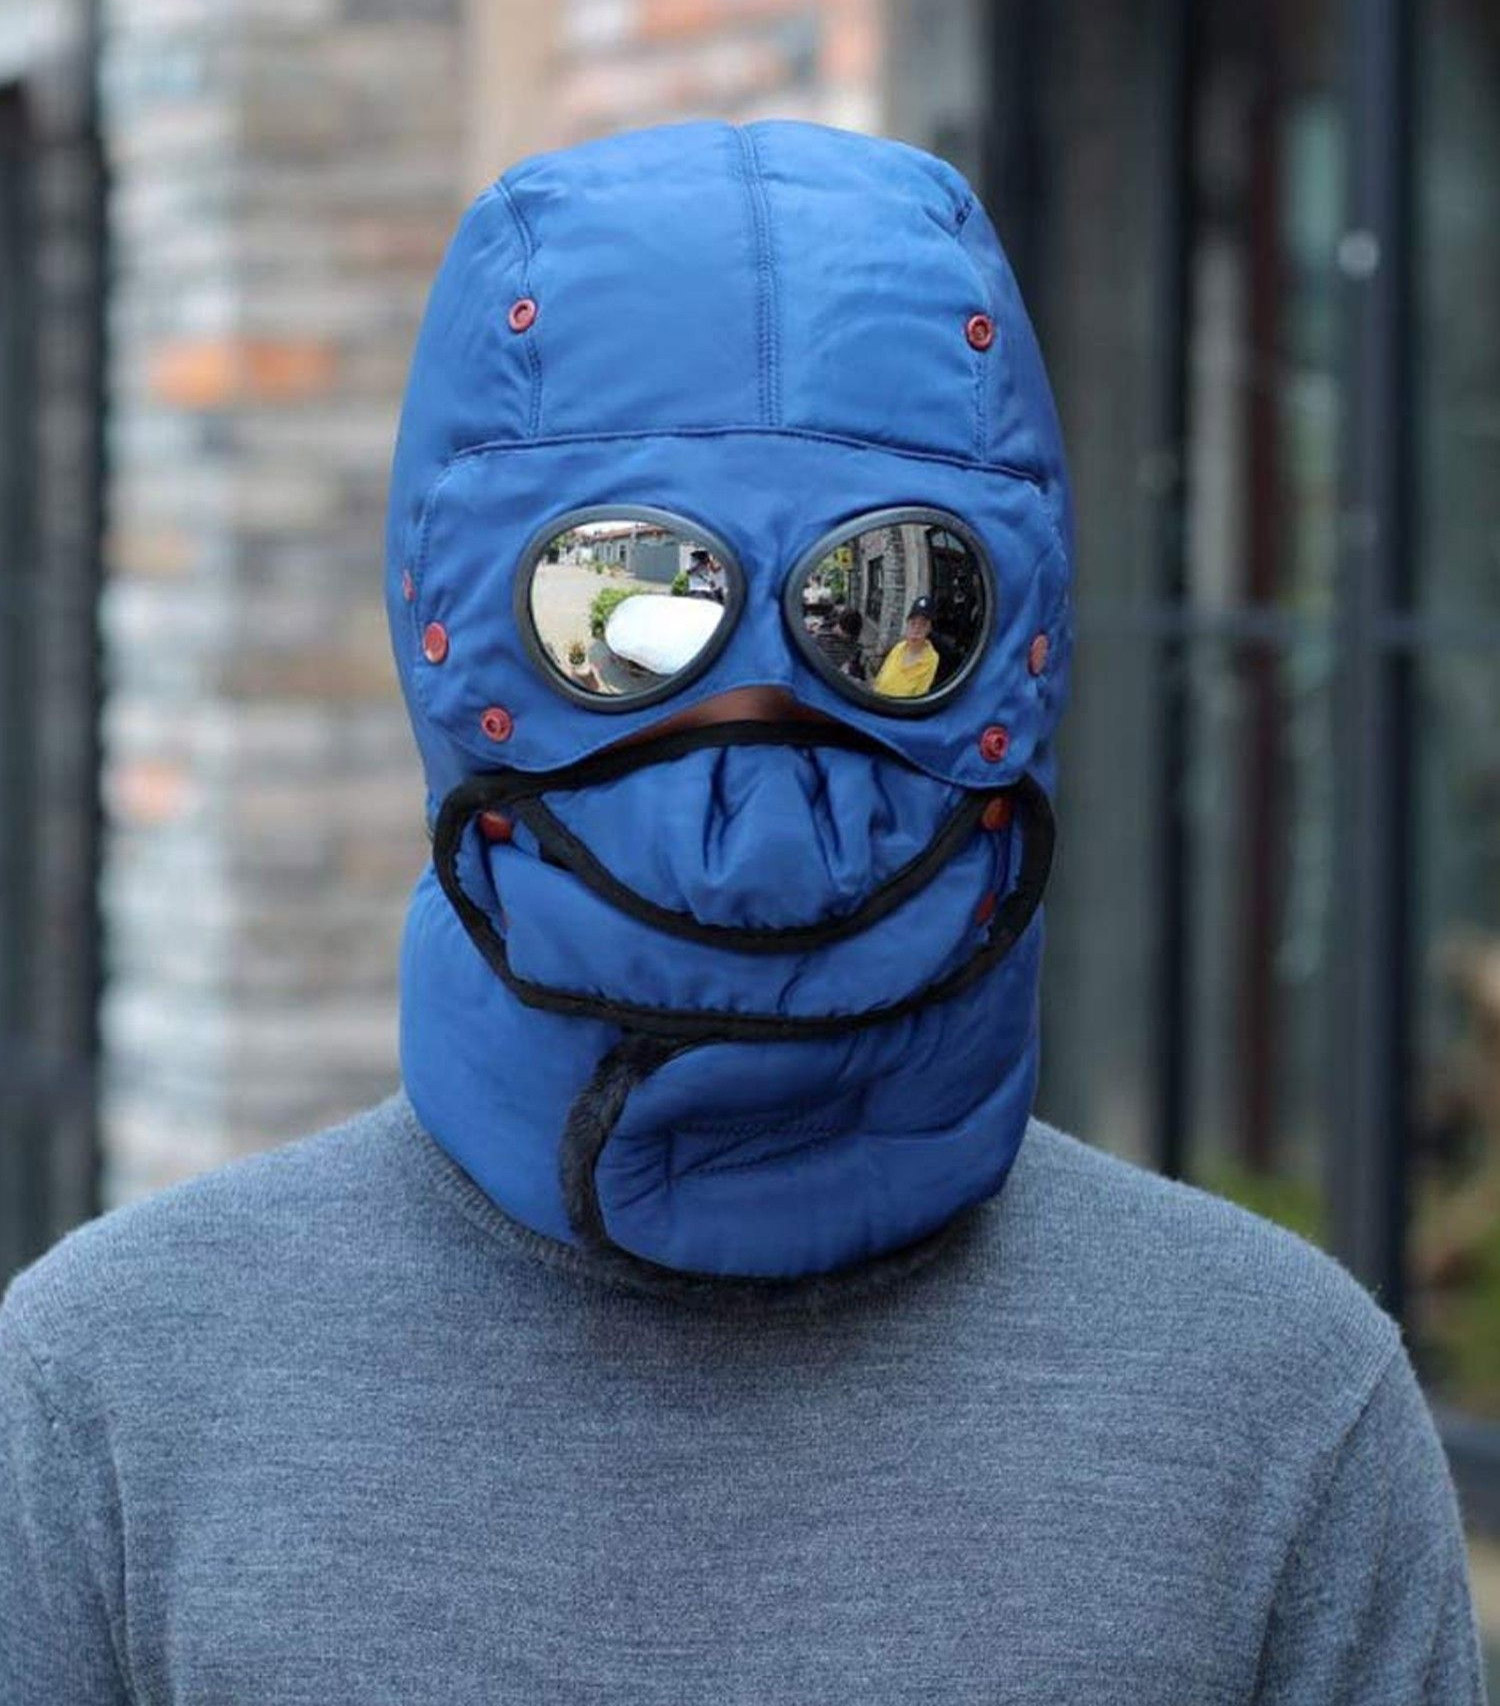 Winter Trapper Hat Covers Your Entire Head, and Has Integrated Sunglasses - Winter hat with face mask and goggles